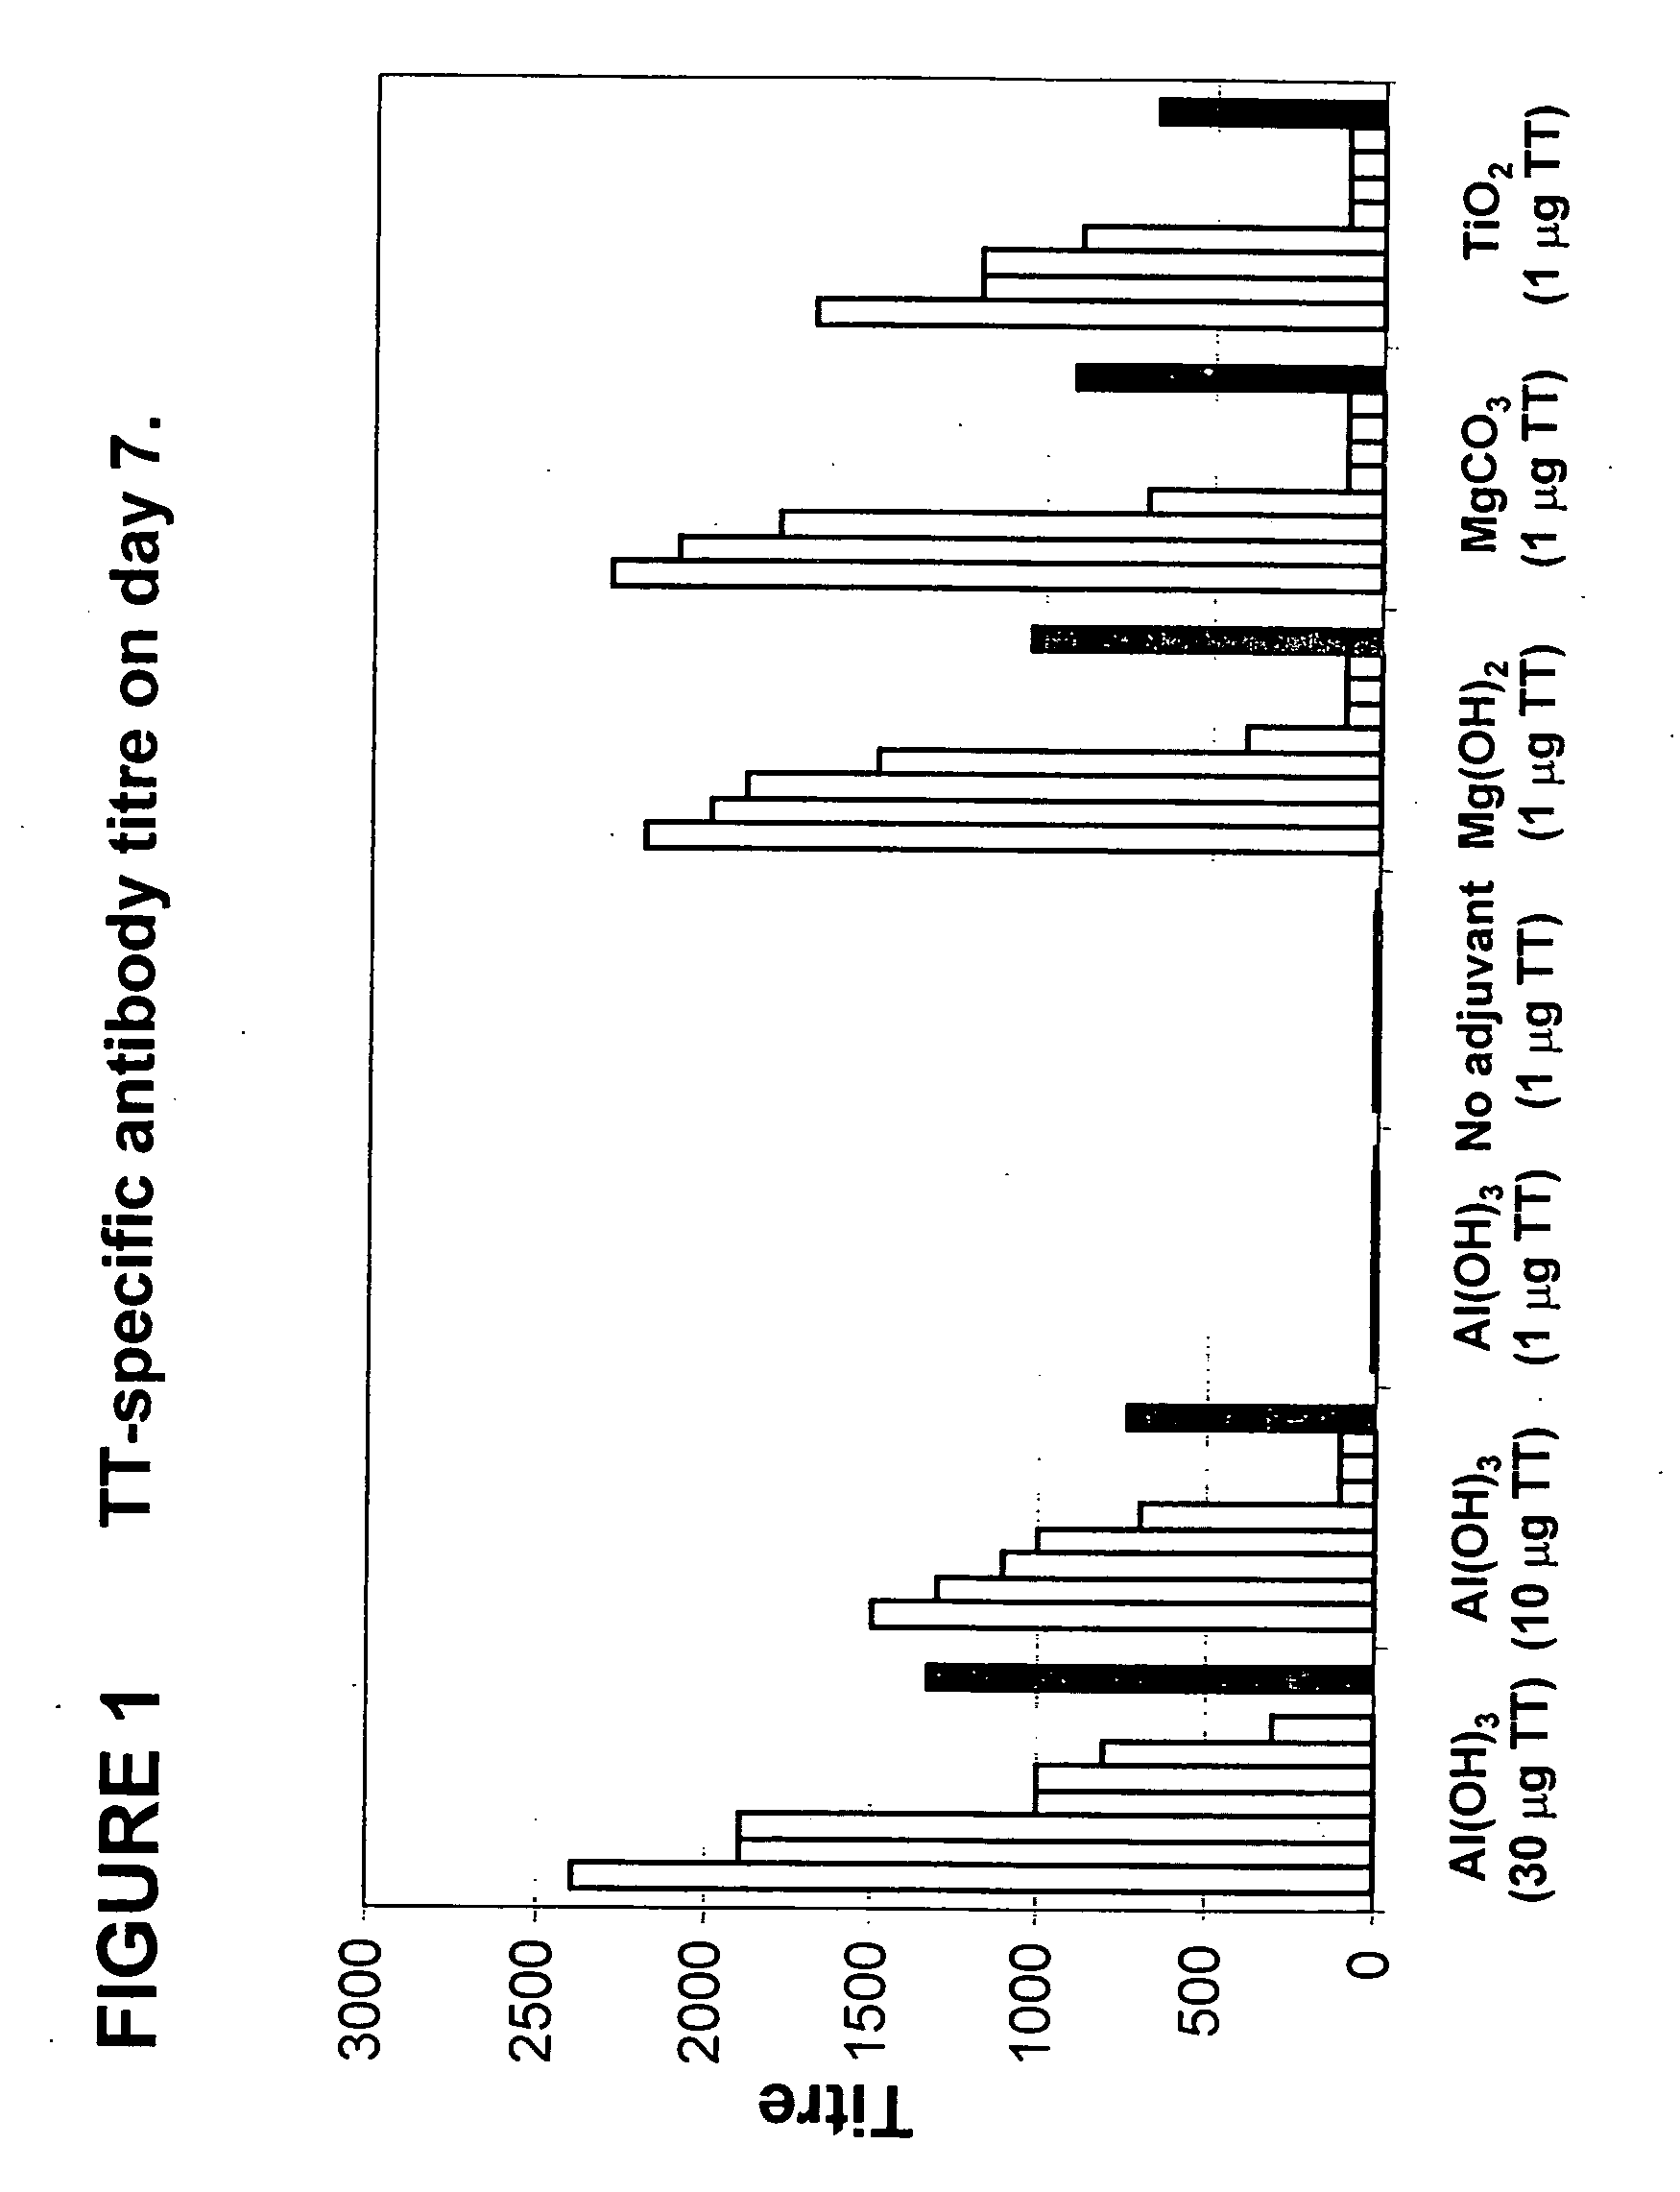 Novel parenteral vaccine formulations and uses thereof